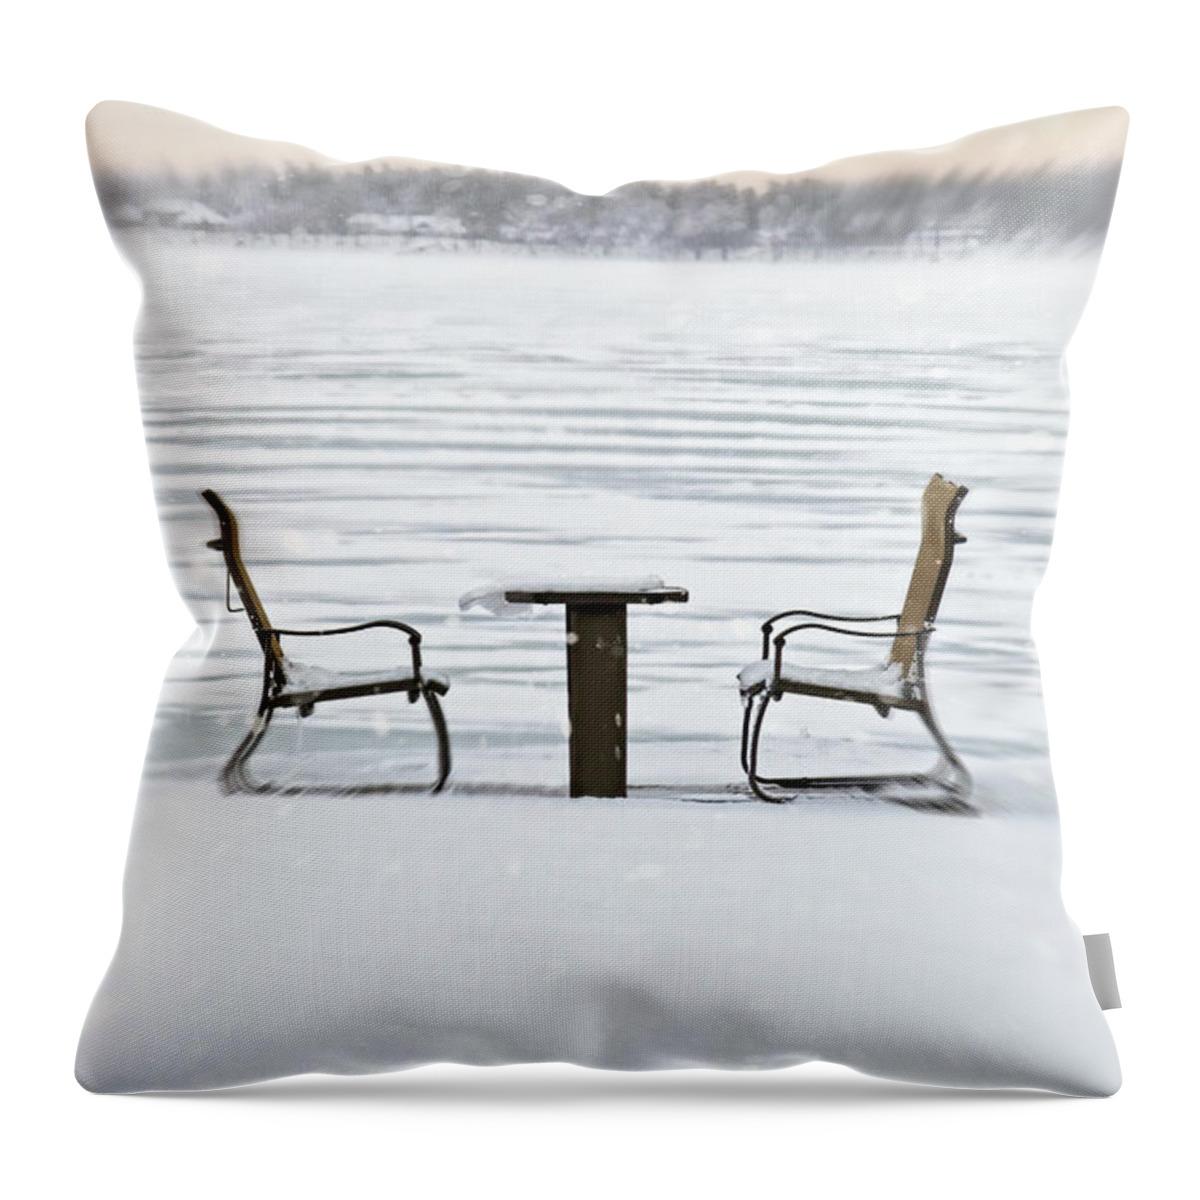 Atmosphere Throw Pillow featuring the photograph Summer chairs in winter near lake by Sandra Cunningham